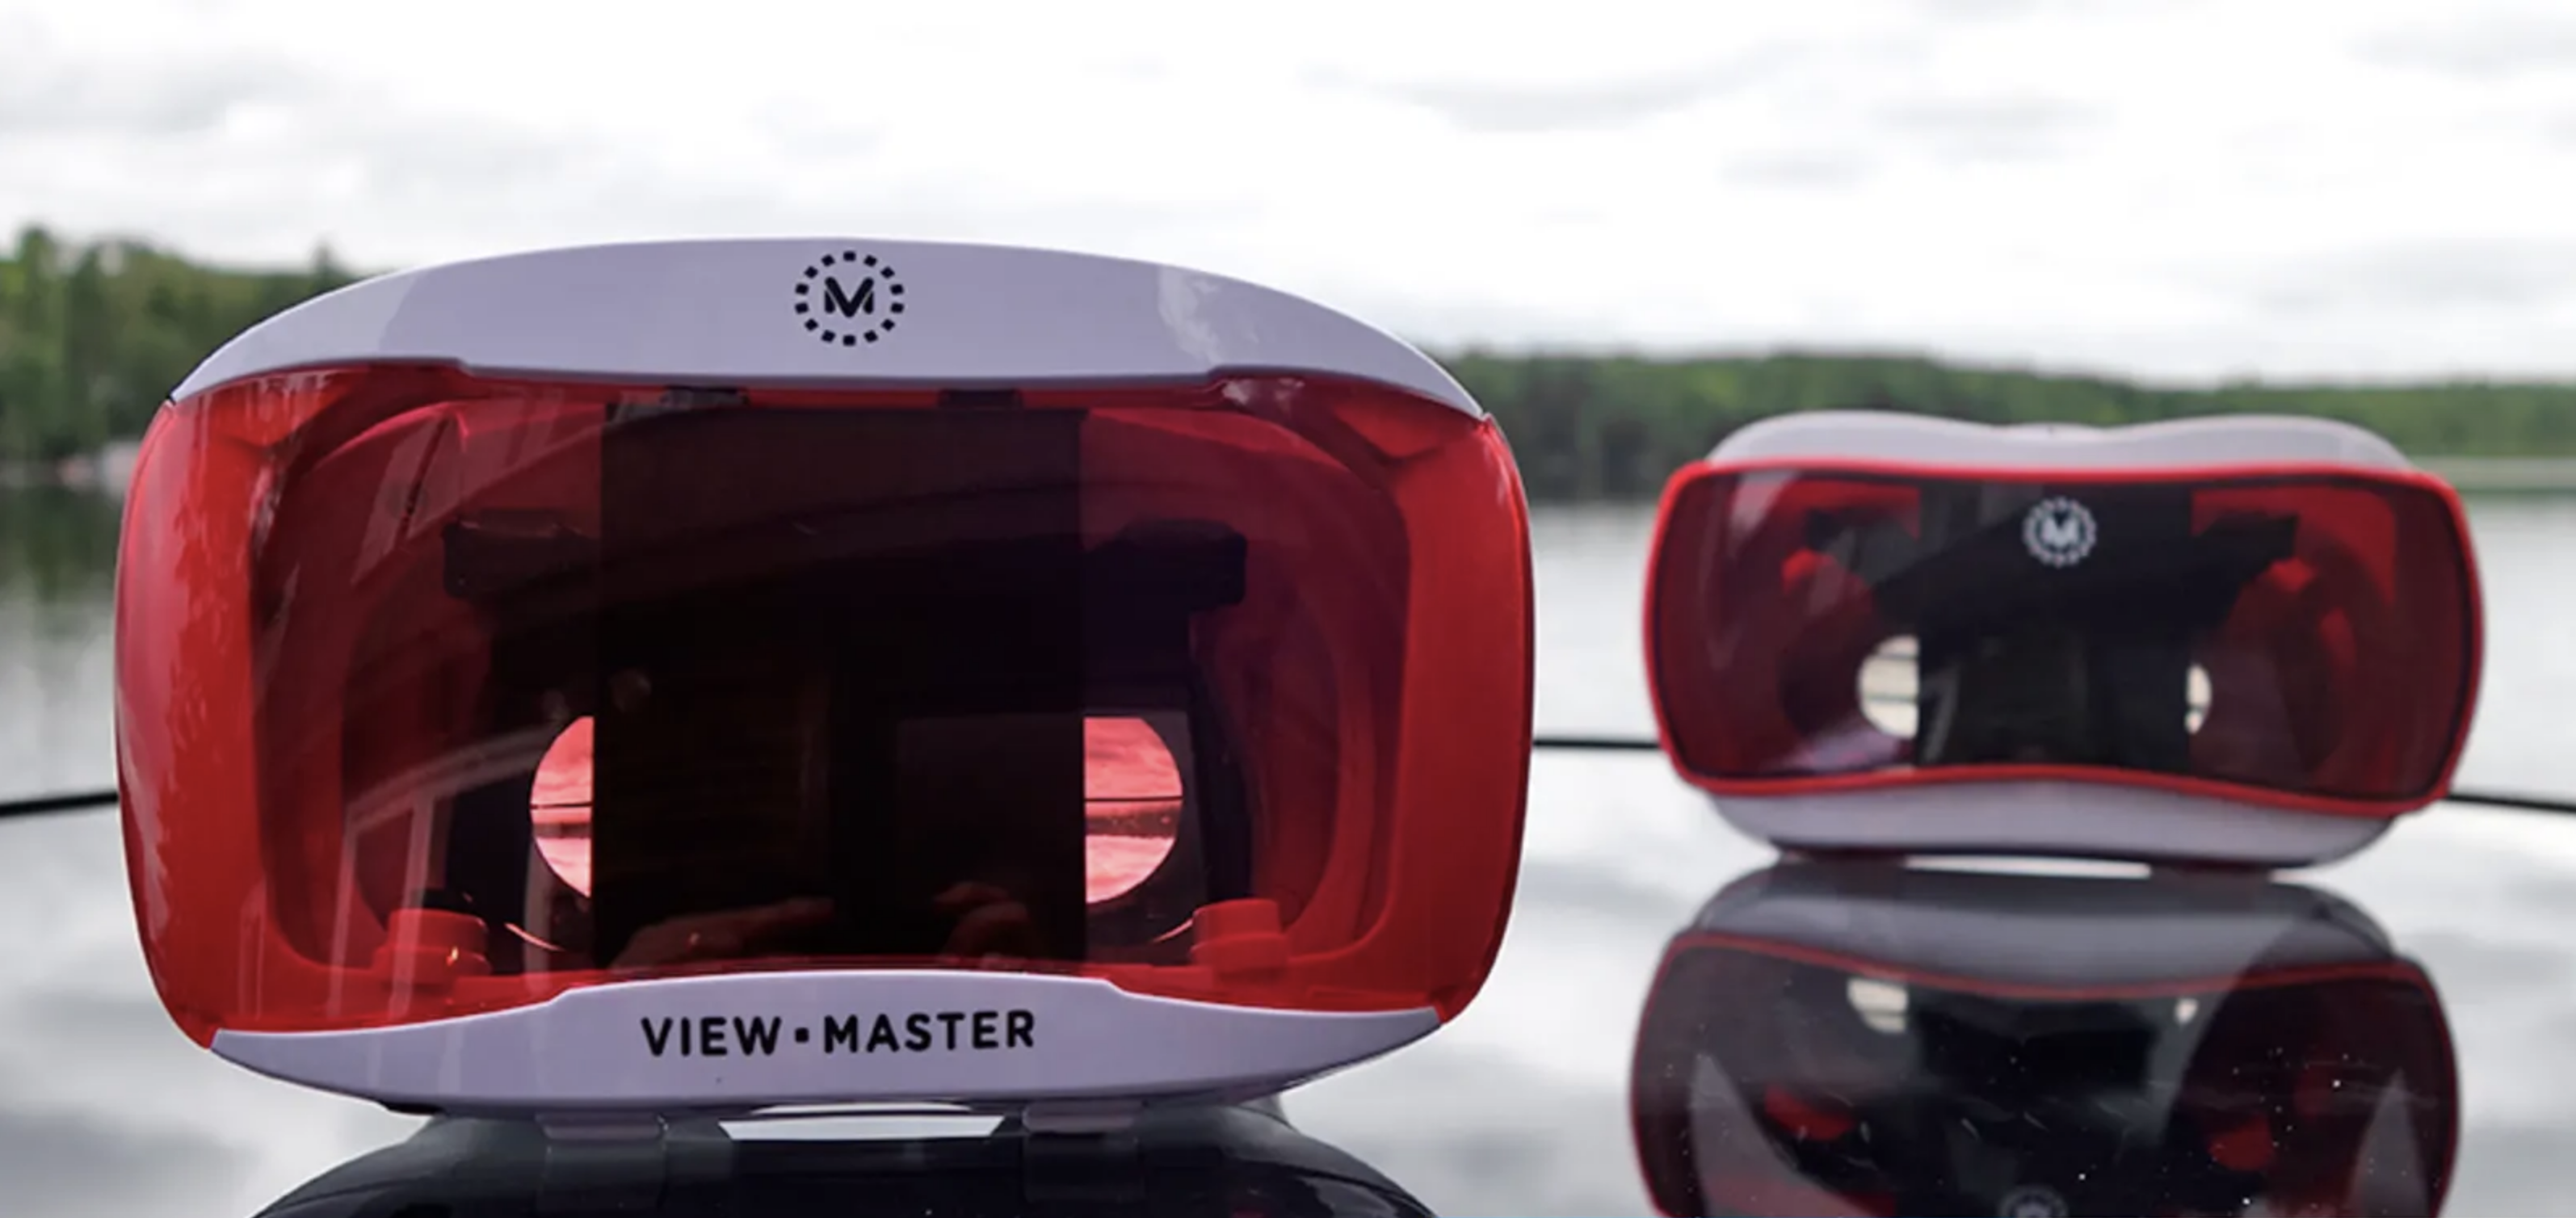 VIEWMASTER - VR